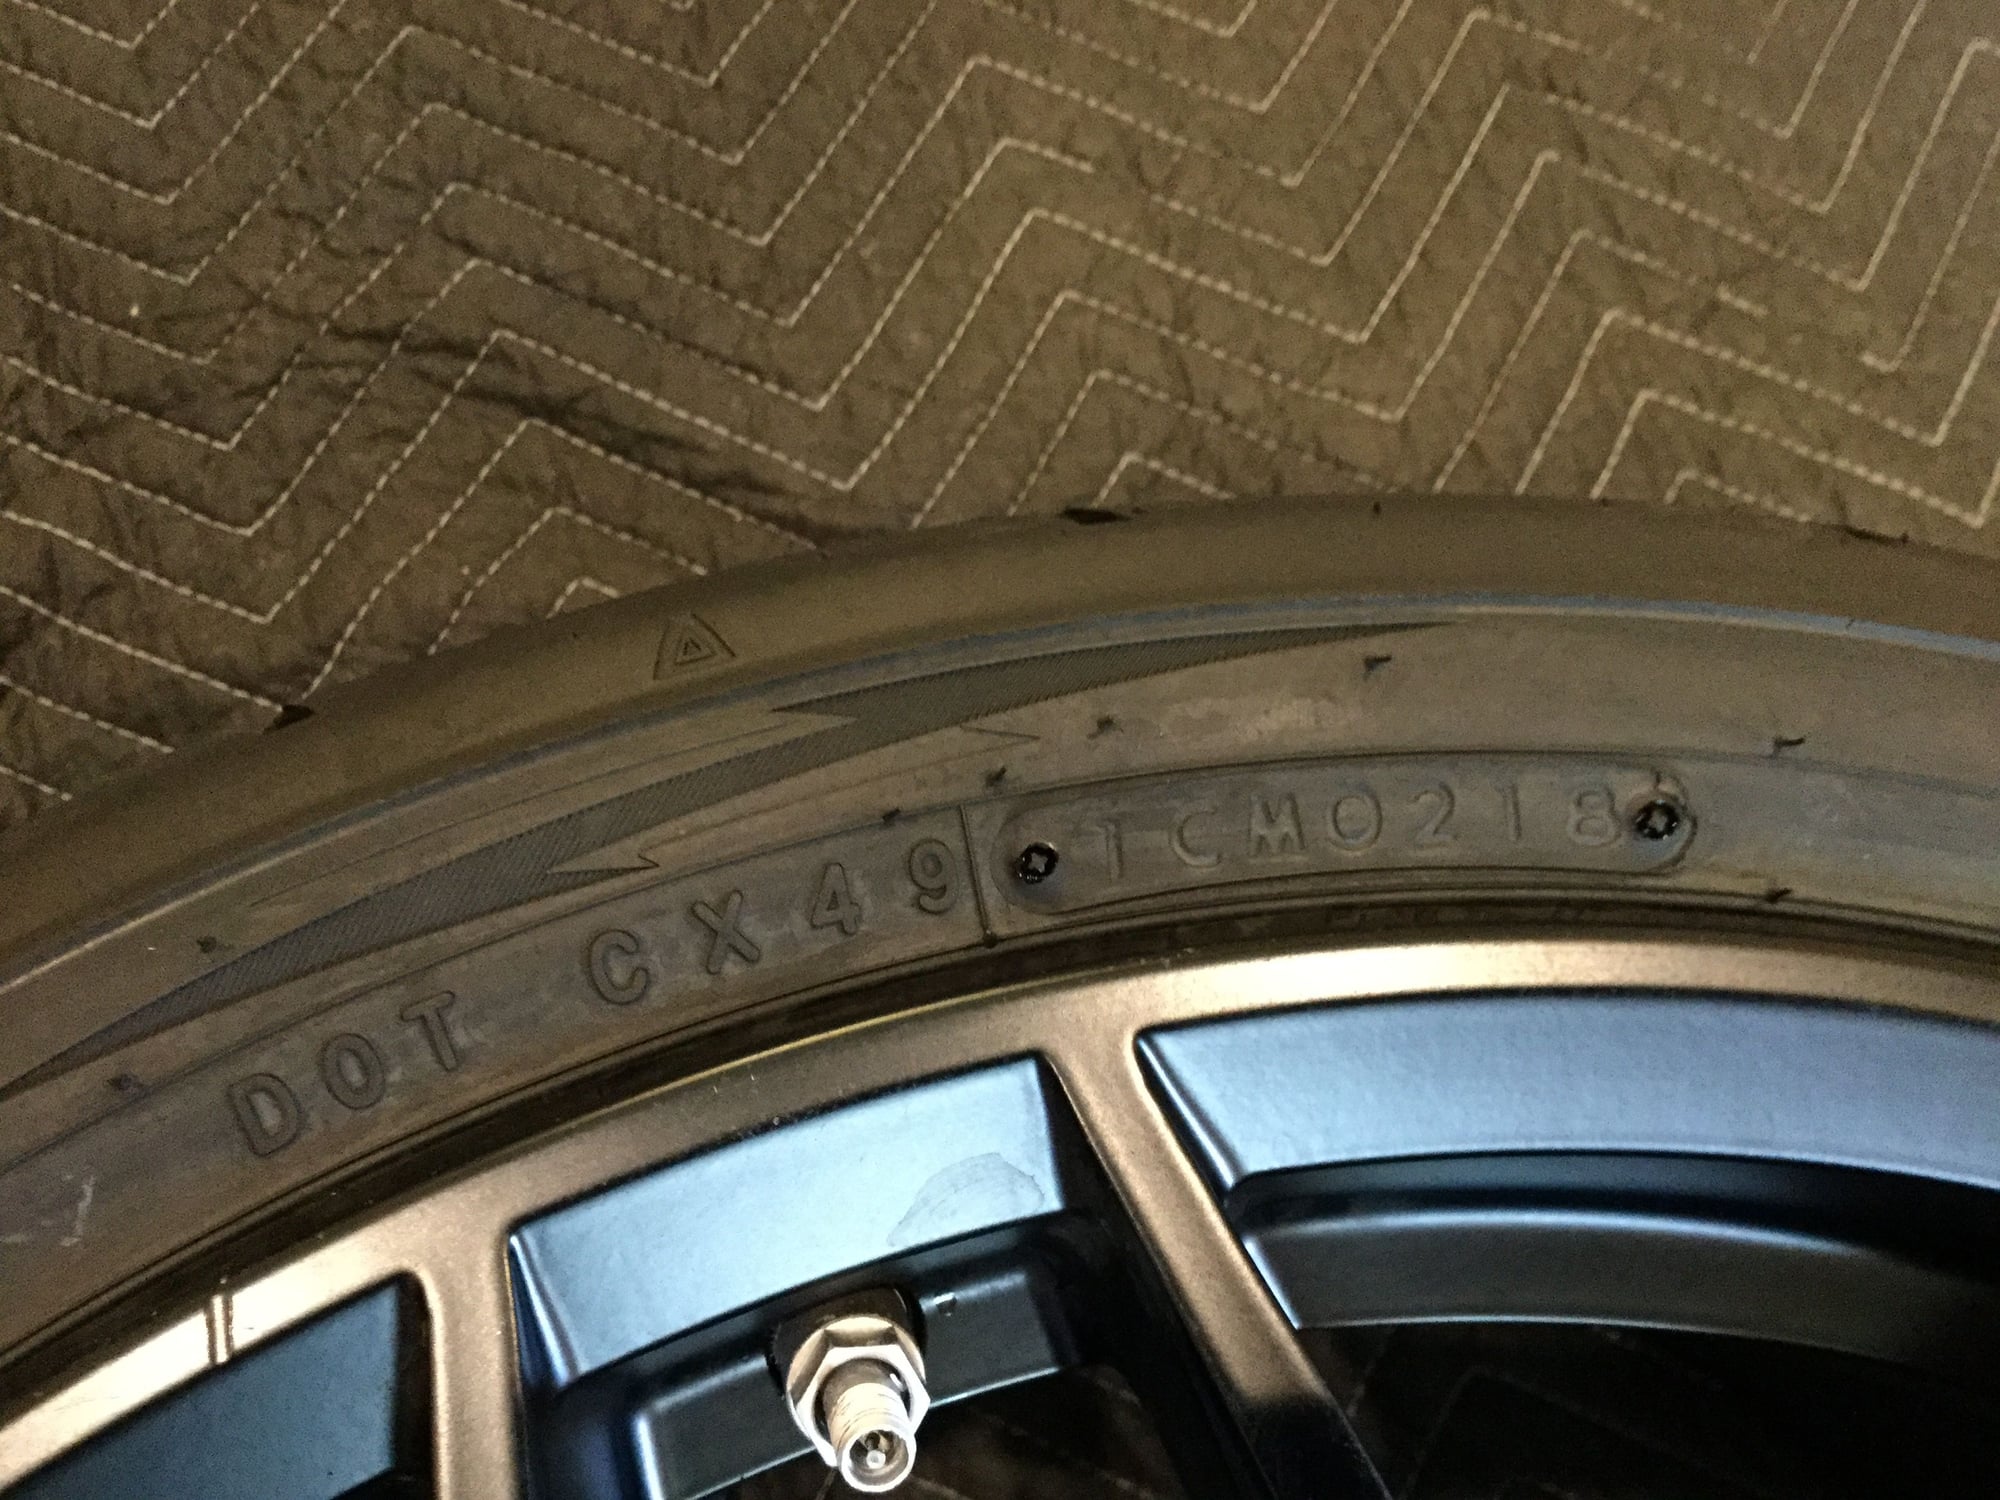 Wheels and Tires/Axles - FS: Toyo R888Rs 19" Staggered set - Used - Huntsville, AL 35824, United States